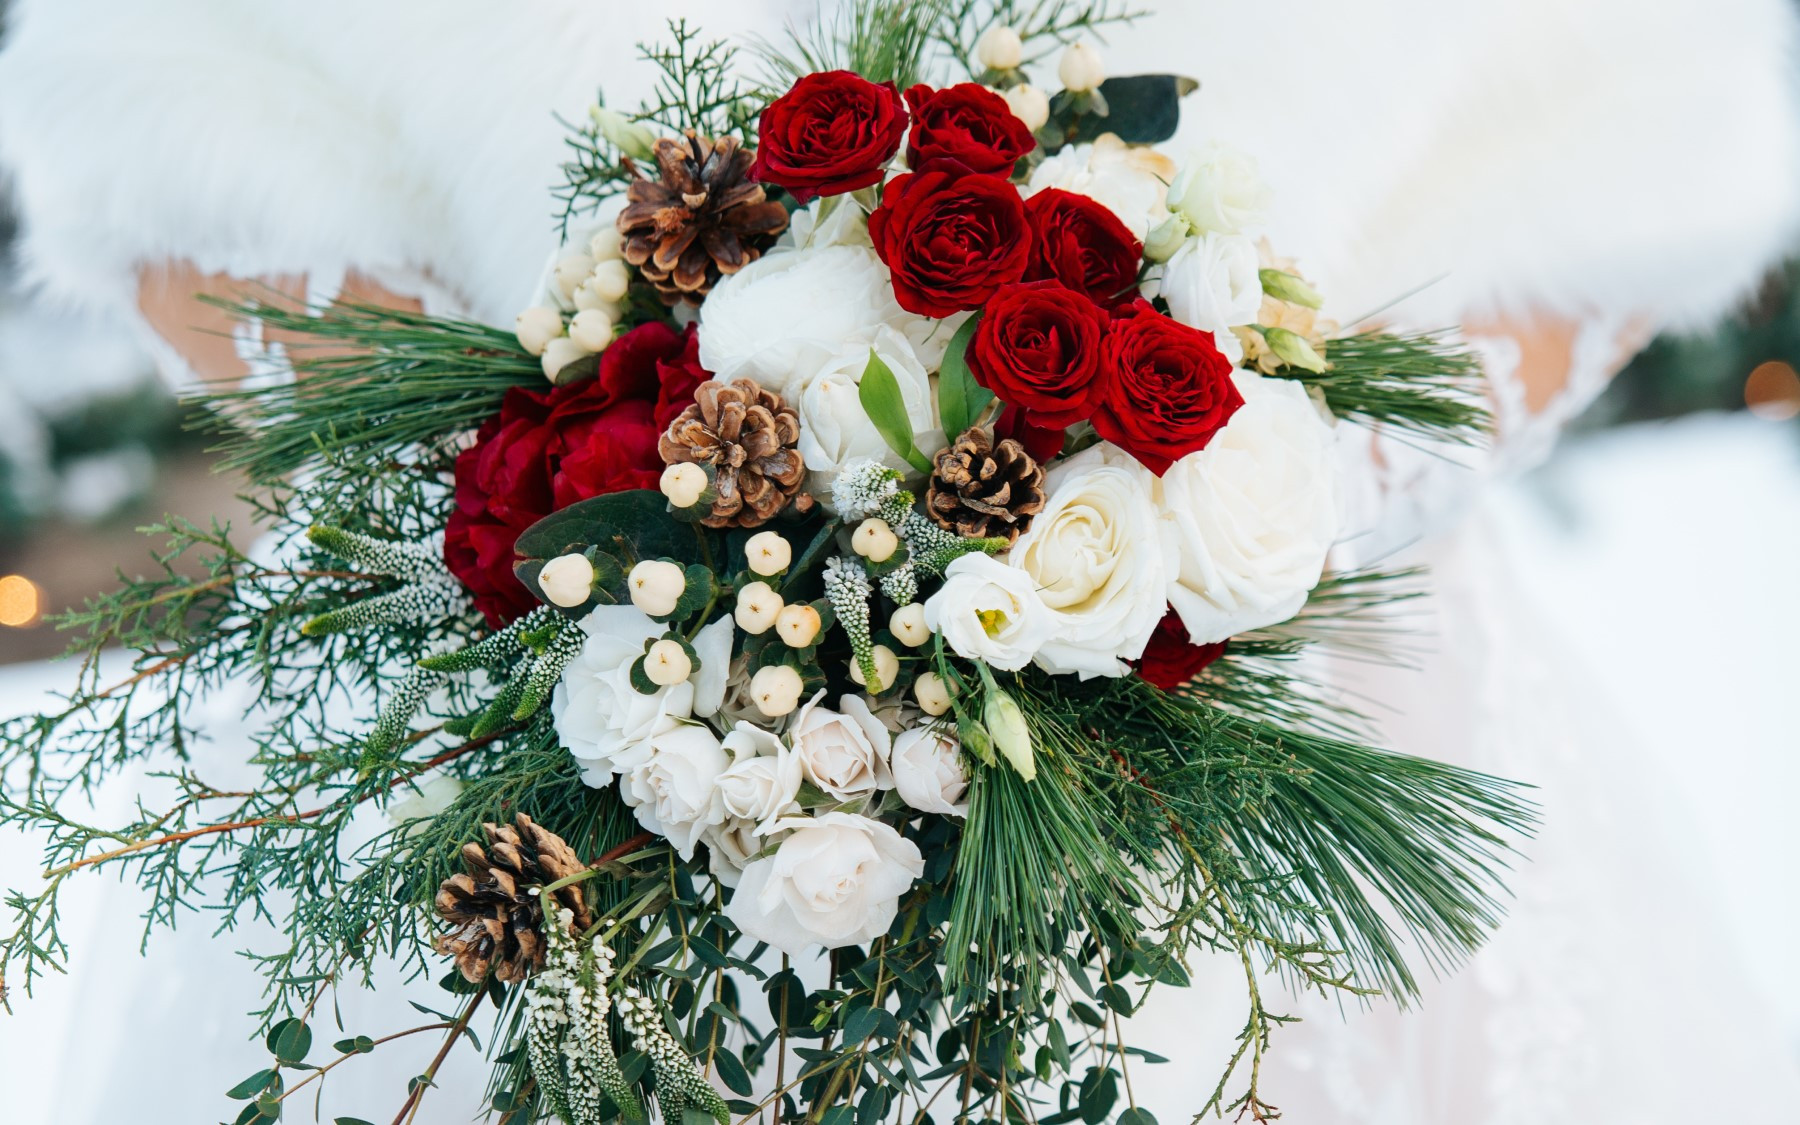 winter wedding bouquet featuring red roses, white roses, pinecones, pine, and other greenery.